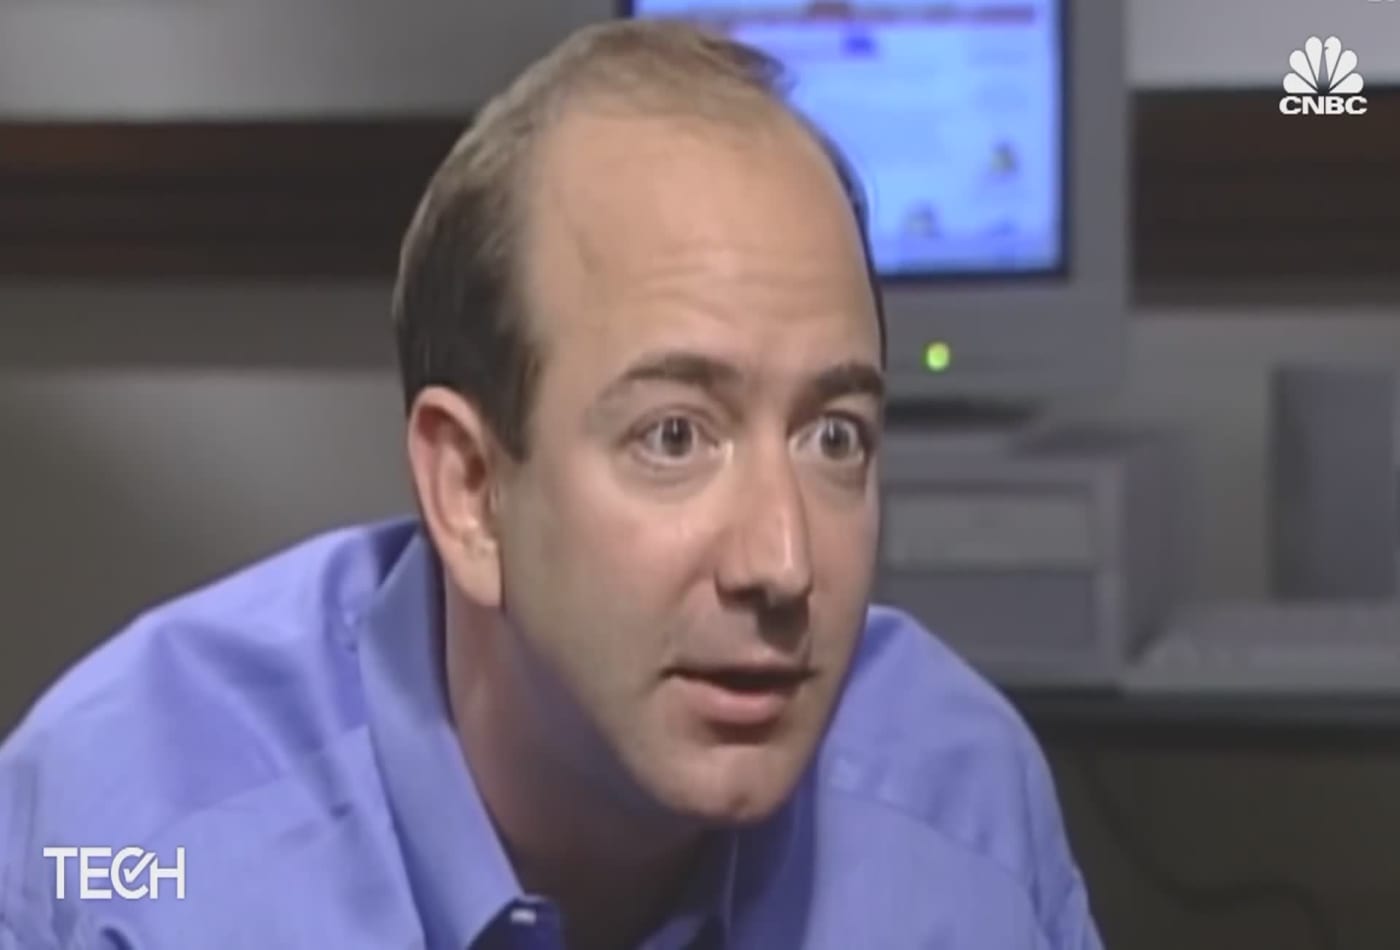 A look back at Jeff Bezos’ early days as Amazon’s founder